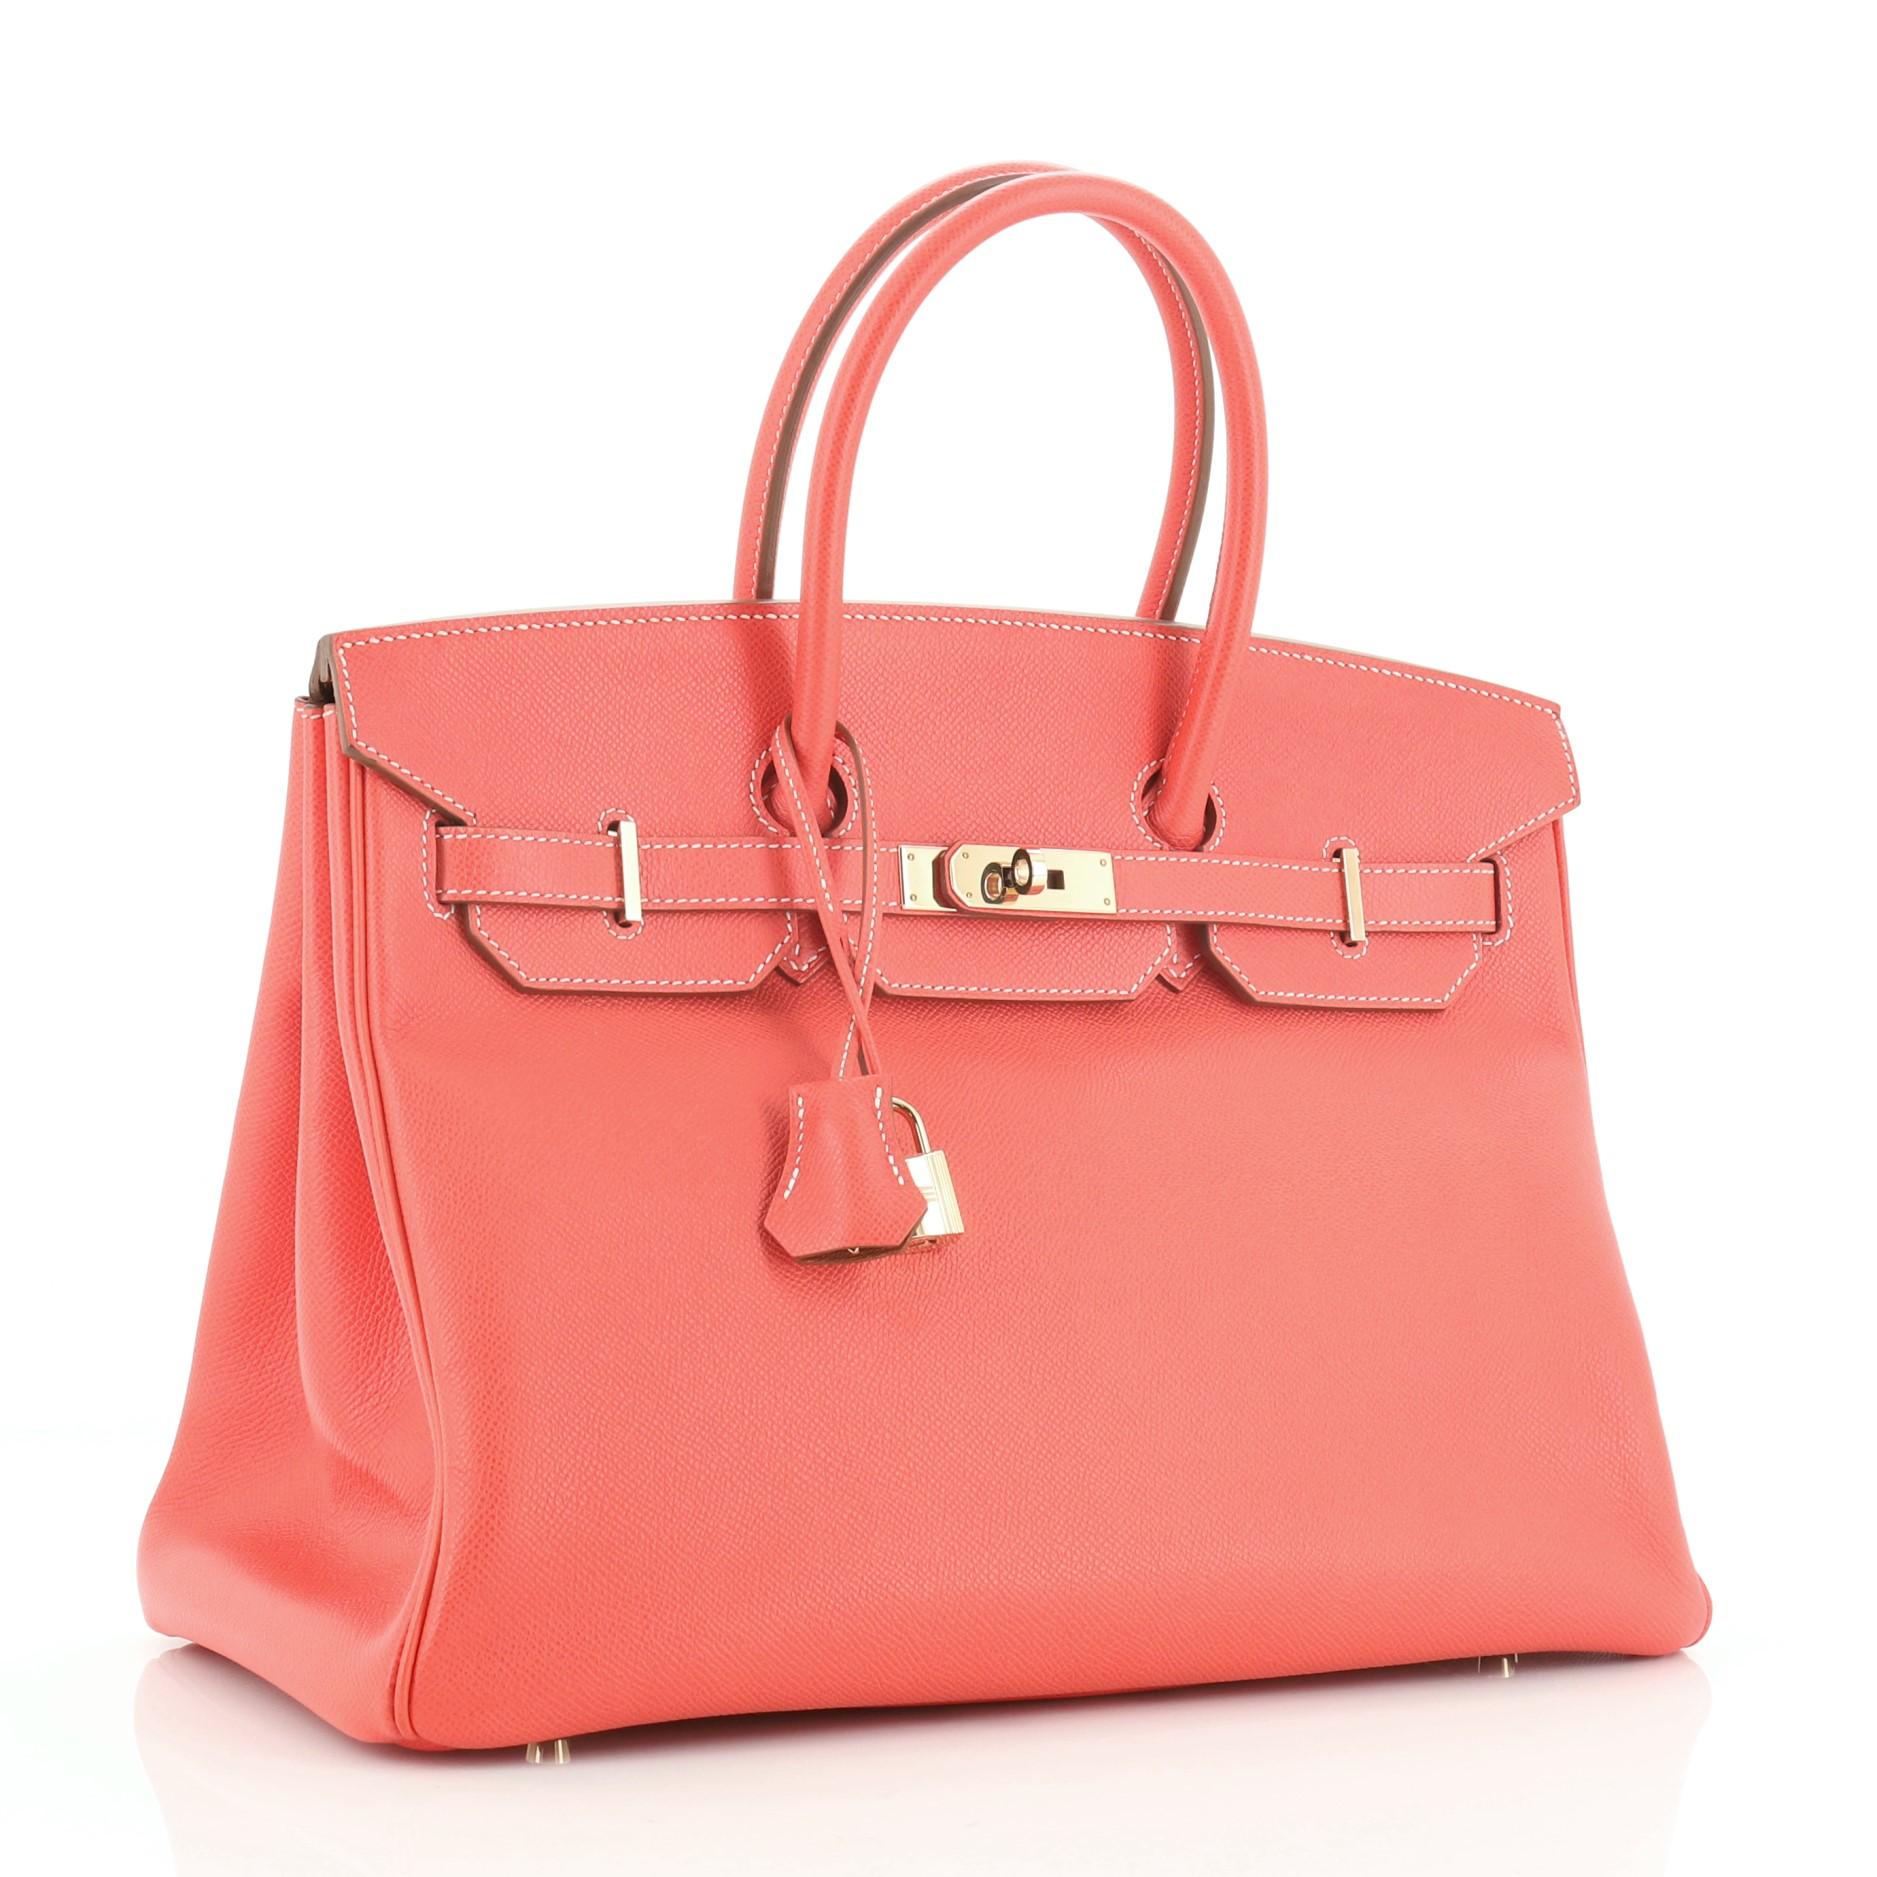 This Hermes Candy Birkin Handbag Epsom 35, crafted from Rose Jaipur pink Epsom leather, features dual rolled handles, front flap, and permabrass hardware. Its turn-lock closure opens to a Gold brown Chevre leather interior with zip and slip pockets.